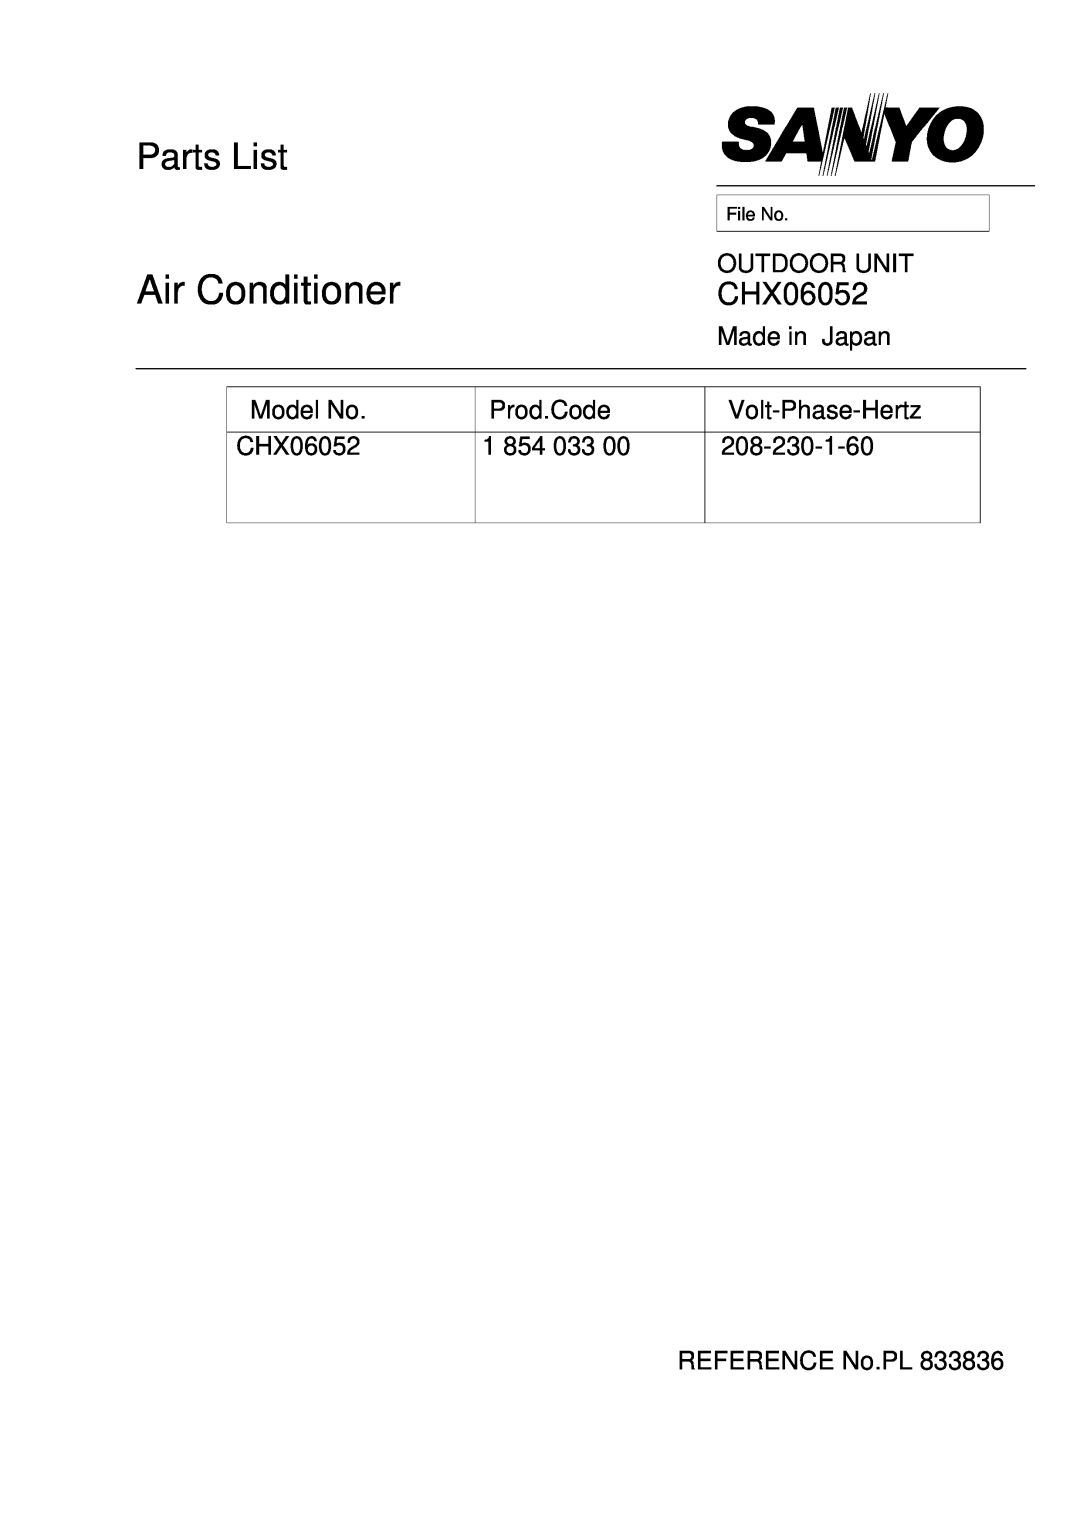 Sanyo manual Air Conditioner, Parts List, Outdoor Unit, Made in Japan, Model No. CHX06052, Prod.Code, Volt-Phase-Hertz 